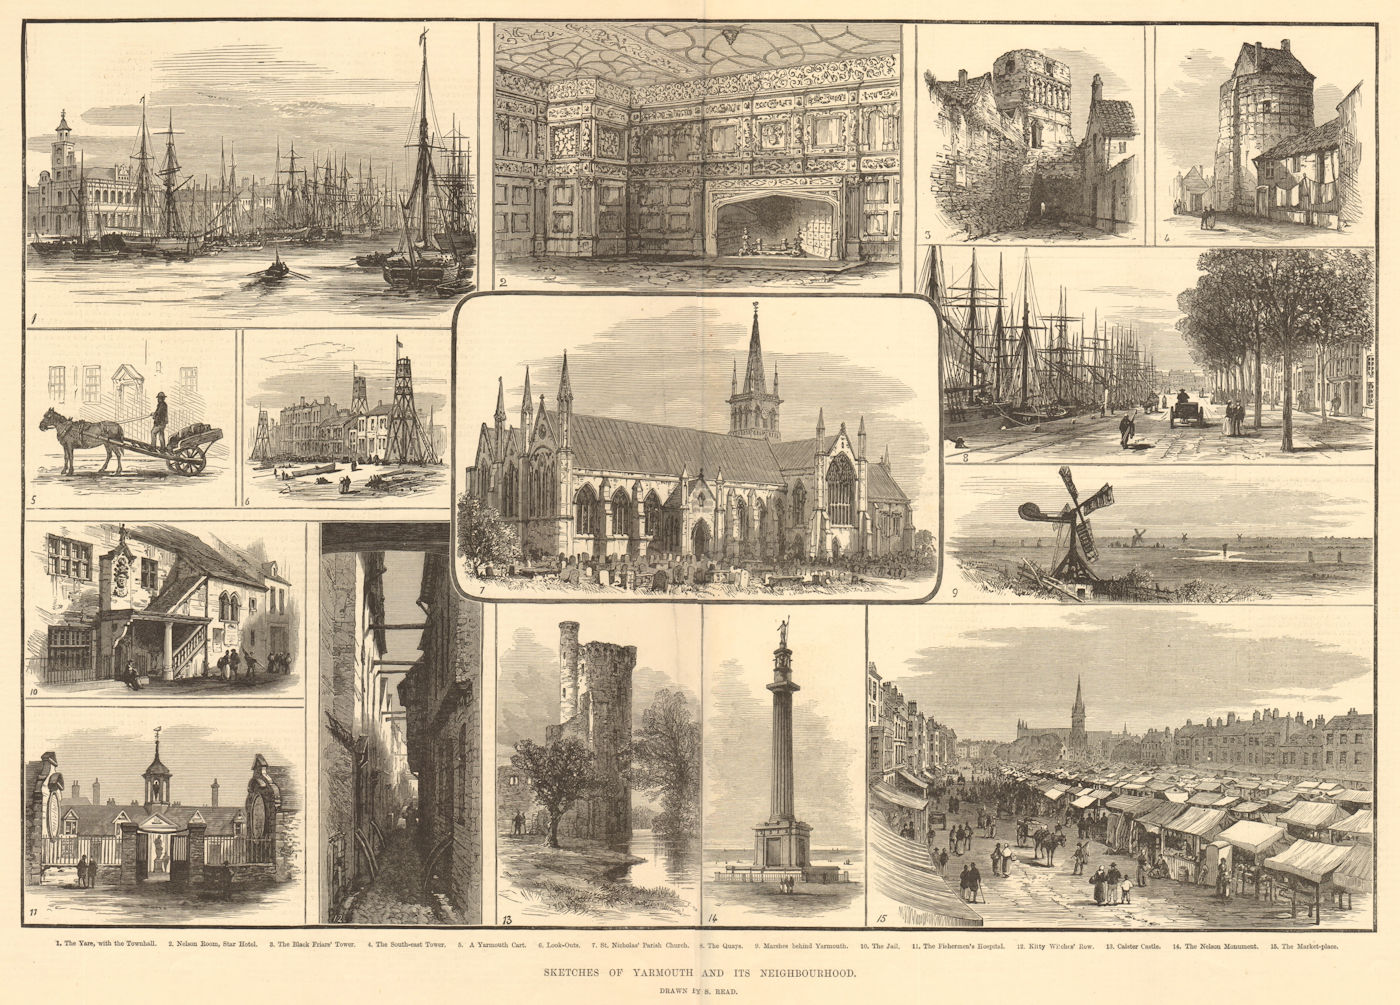 Sketches of Yarmouth & its neighbourhood. Drawn by S. Read. Norfolk 1882